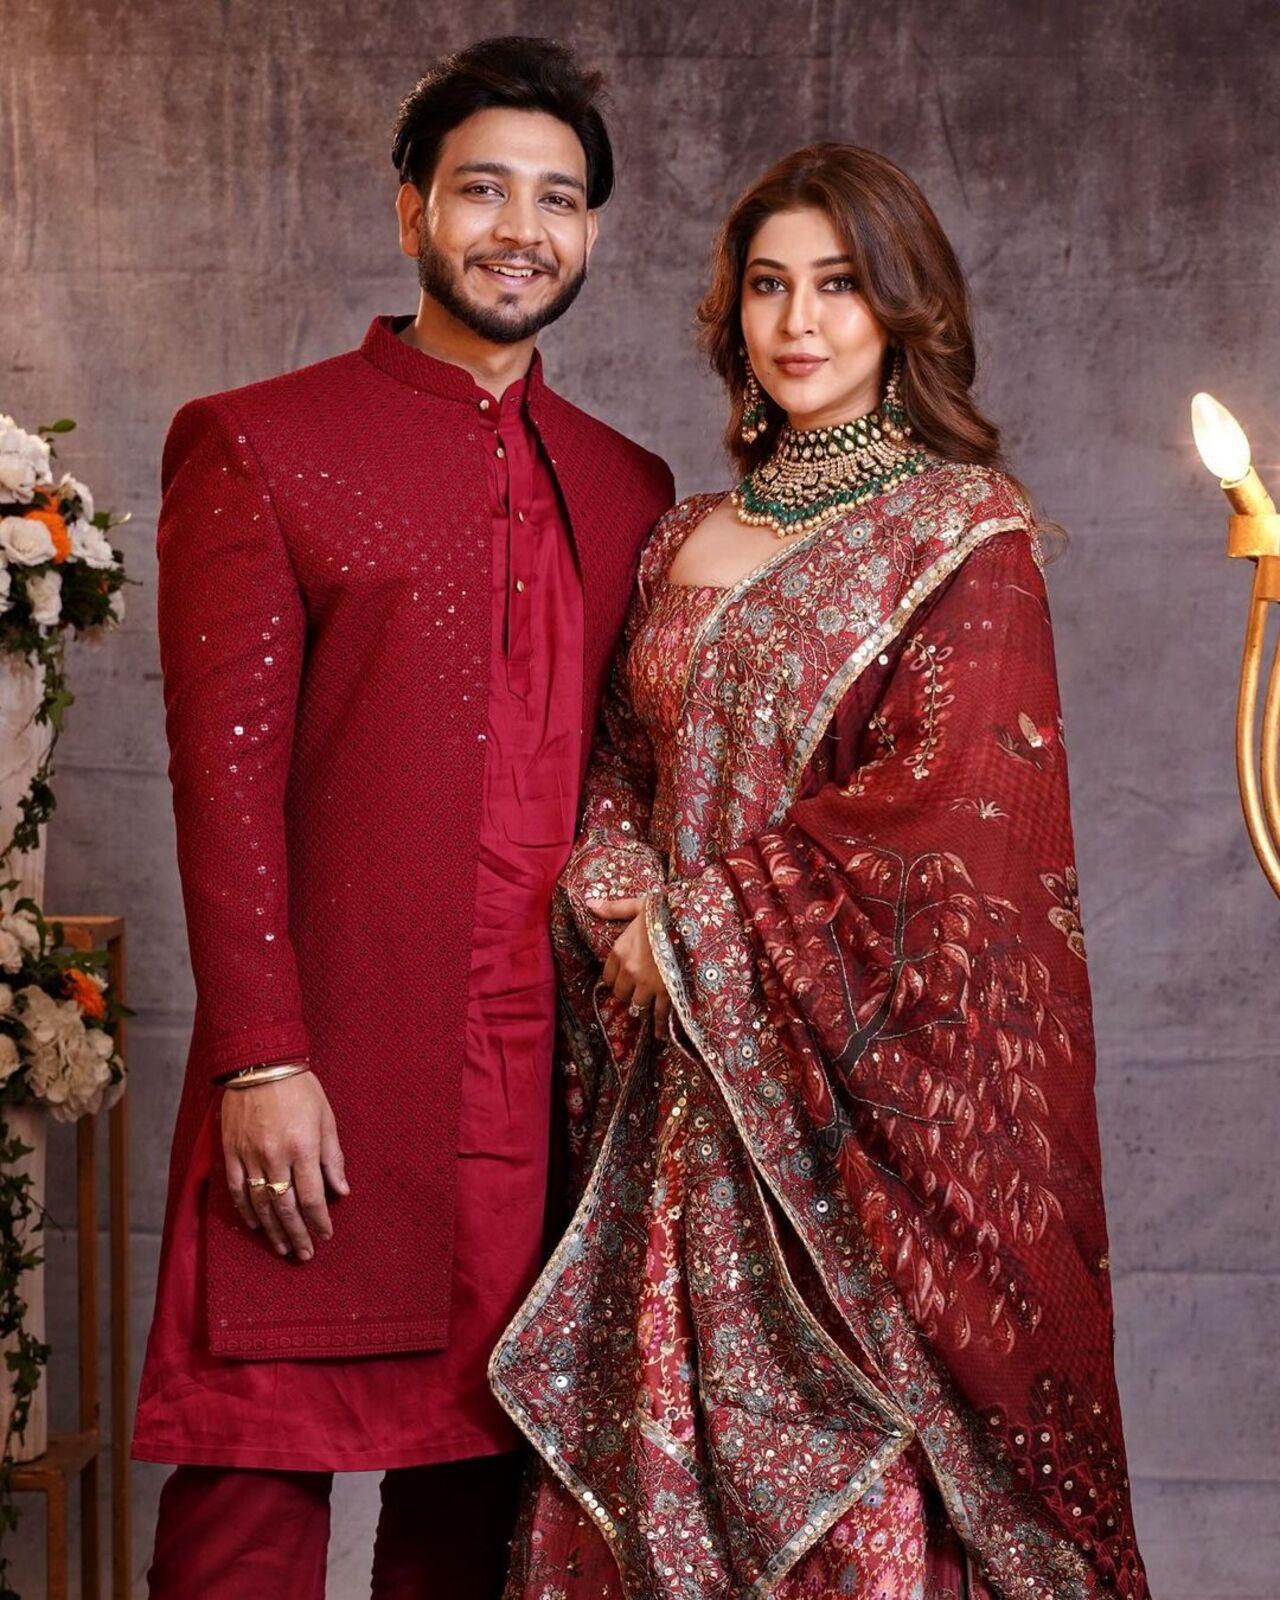 For Mata Ki Chowki, the couple twinned in deep red colour traditional outfits. Sonarika looked stunning in a heavily embroidered red anarkali suit with heavy statement jewellery while Vikas opted for a shimmery sherwani